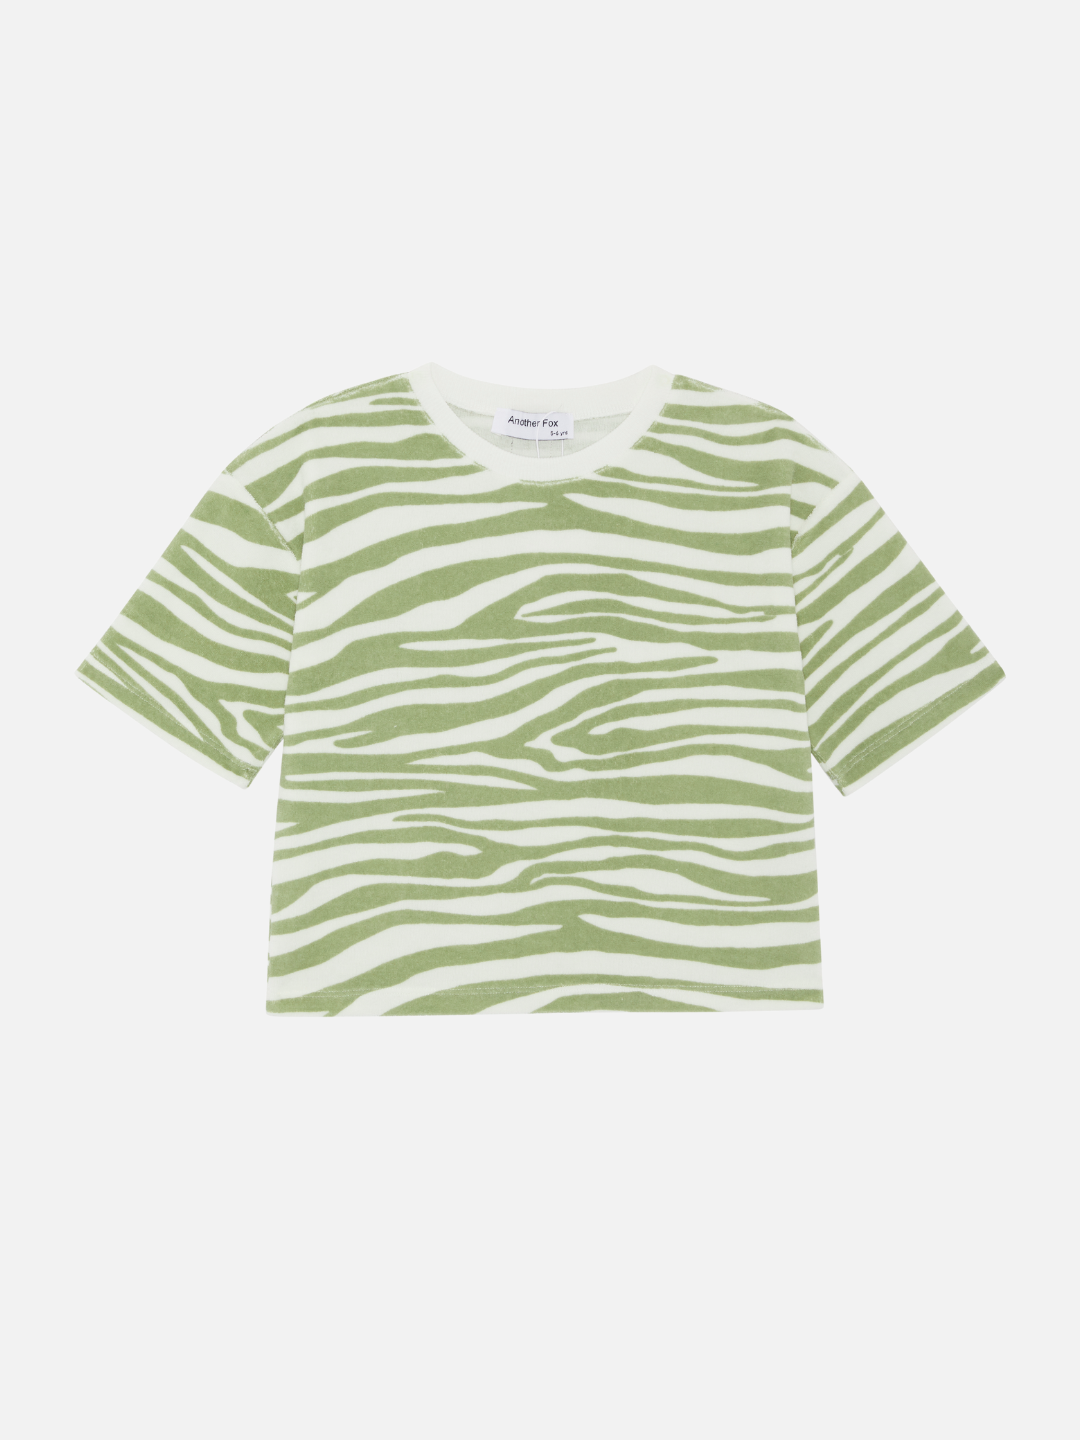 A front view of the kid's tee in green tiger print